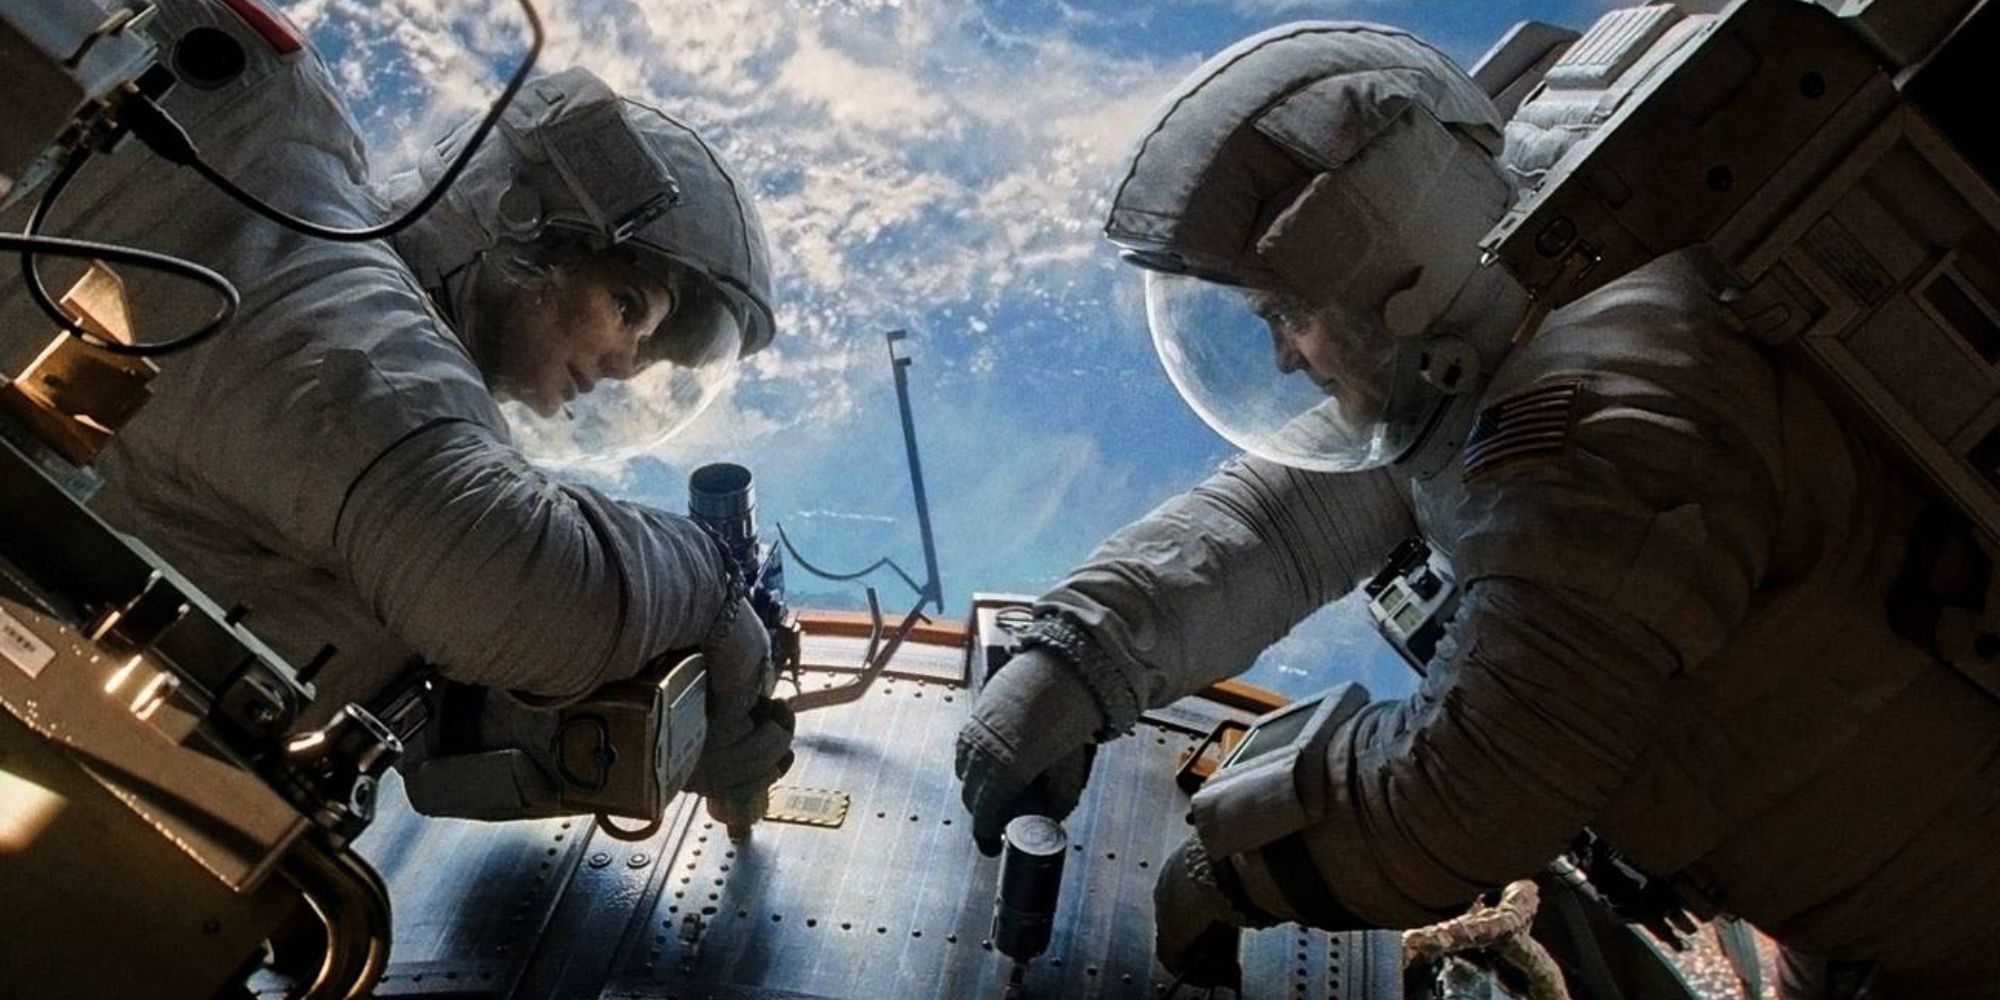 Two astronauts converse over their repairs 